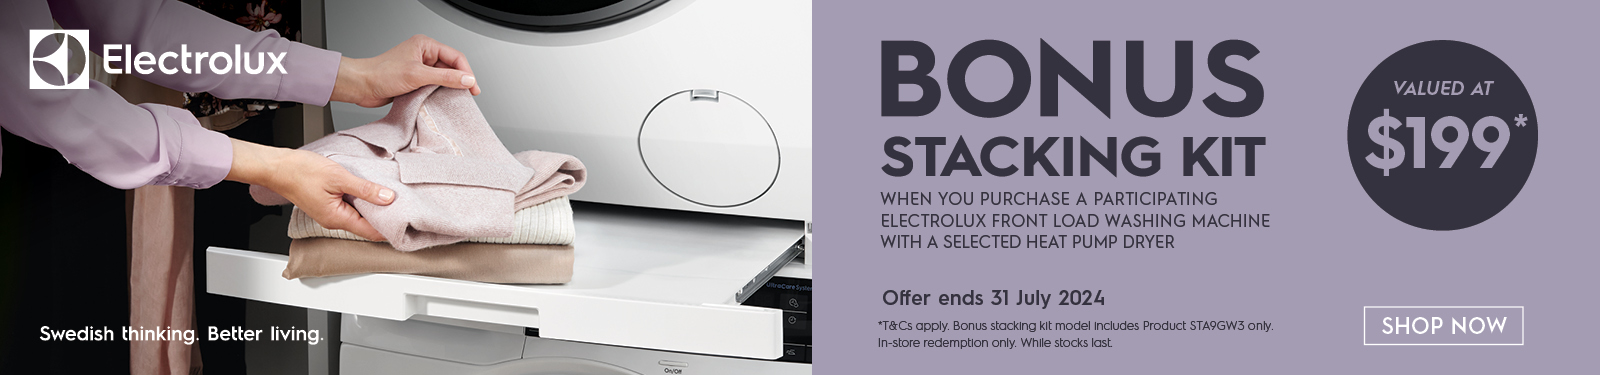 Bonus Stacking Kit Valued At $199* When You Purchase A Participating Electrolux Washer and Dryer Pair at Retravision